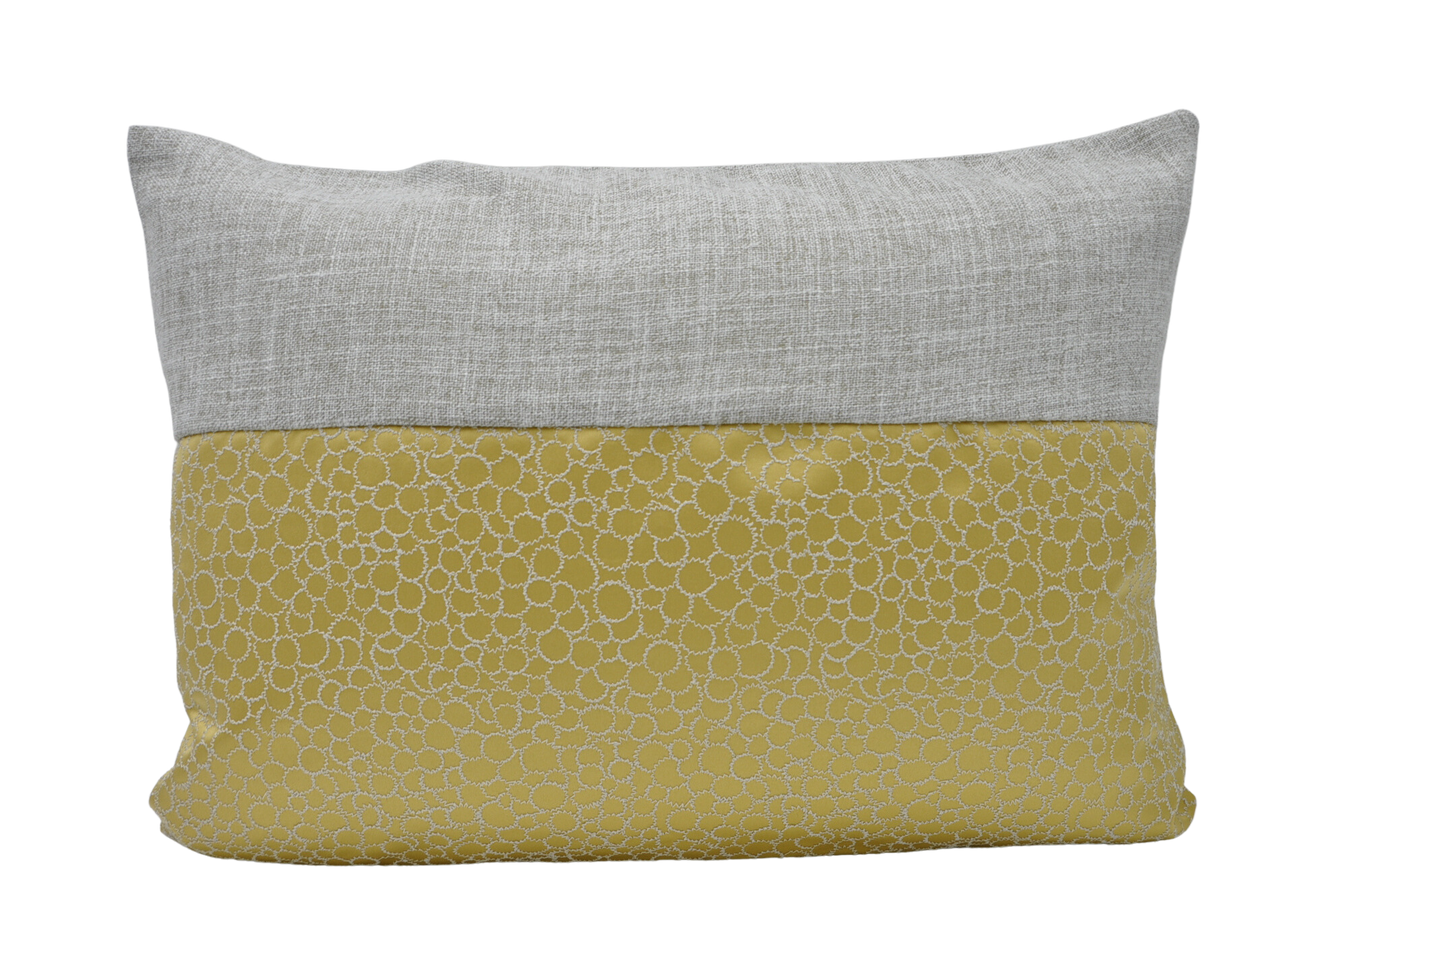 Gold Pearls - Sustainable Décor Pillows